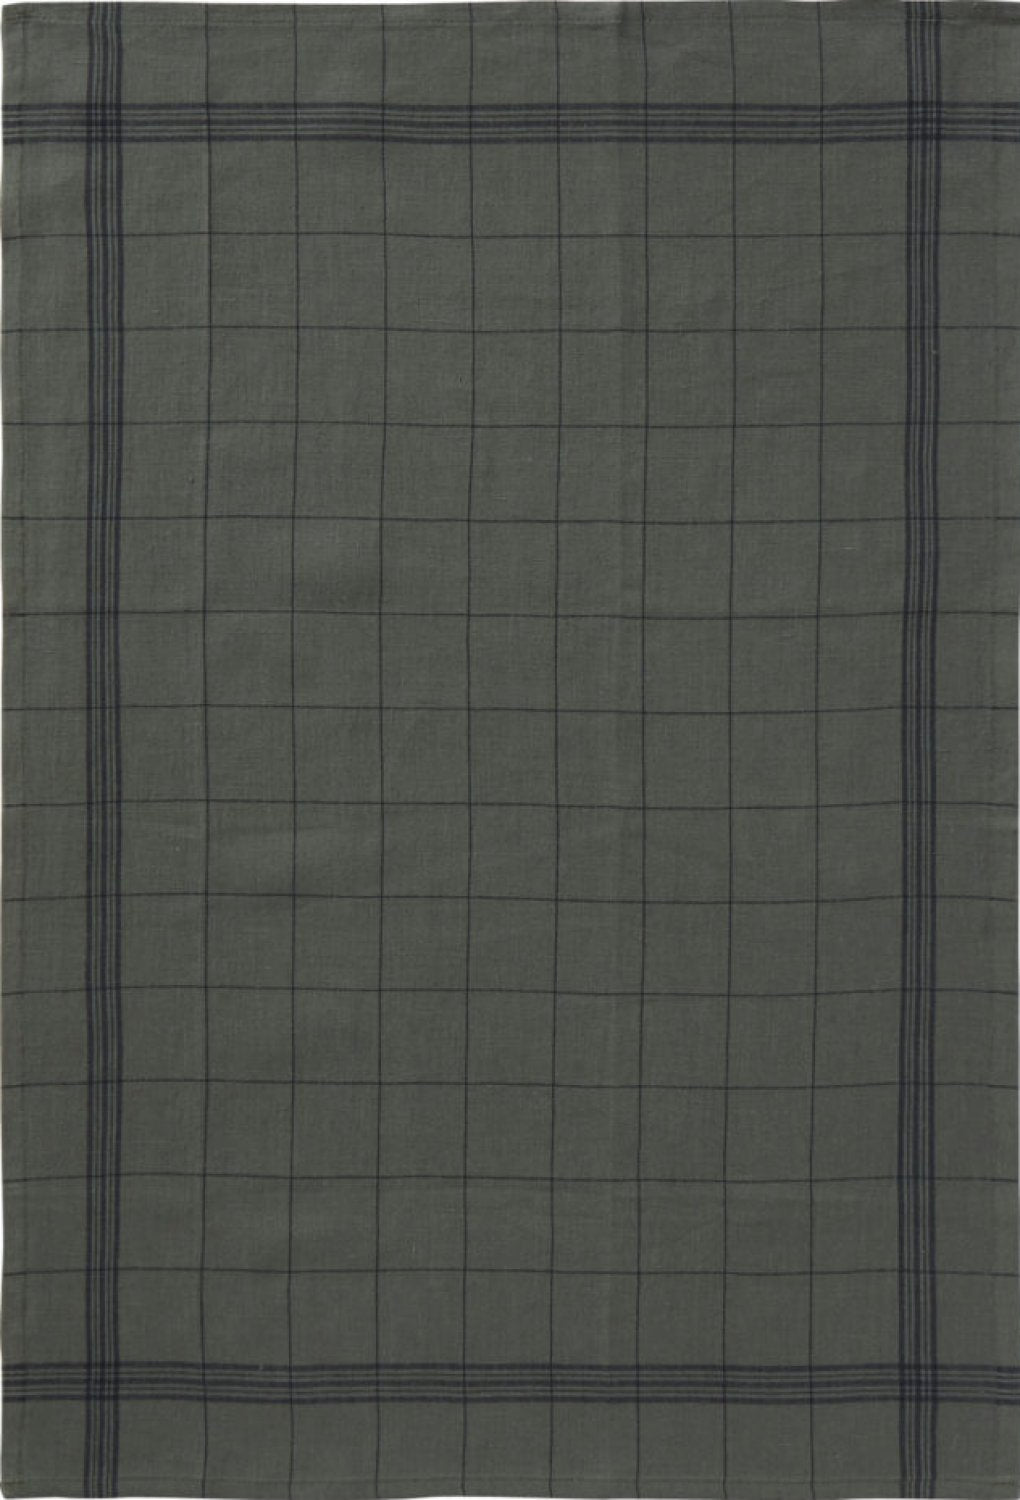 Charvet Éditions "Bistro" (Romarin), Natural woven linen tea towel. Made in France.